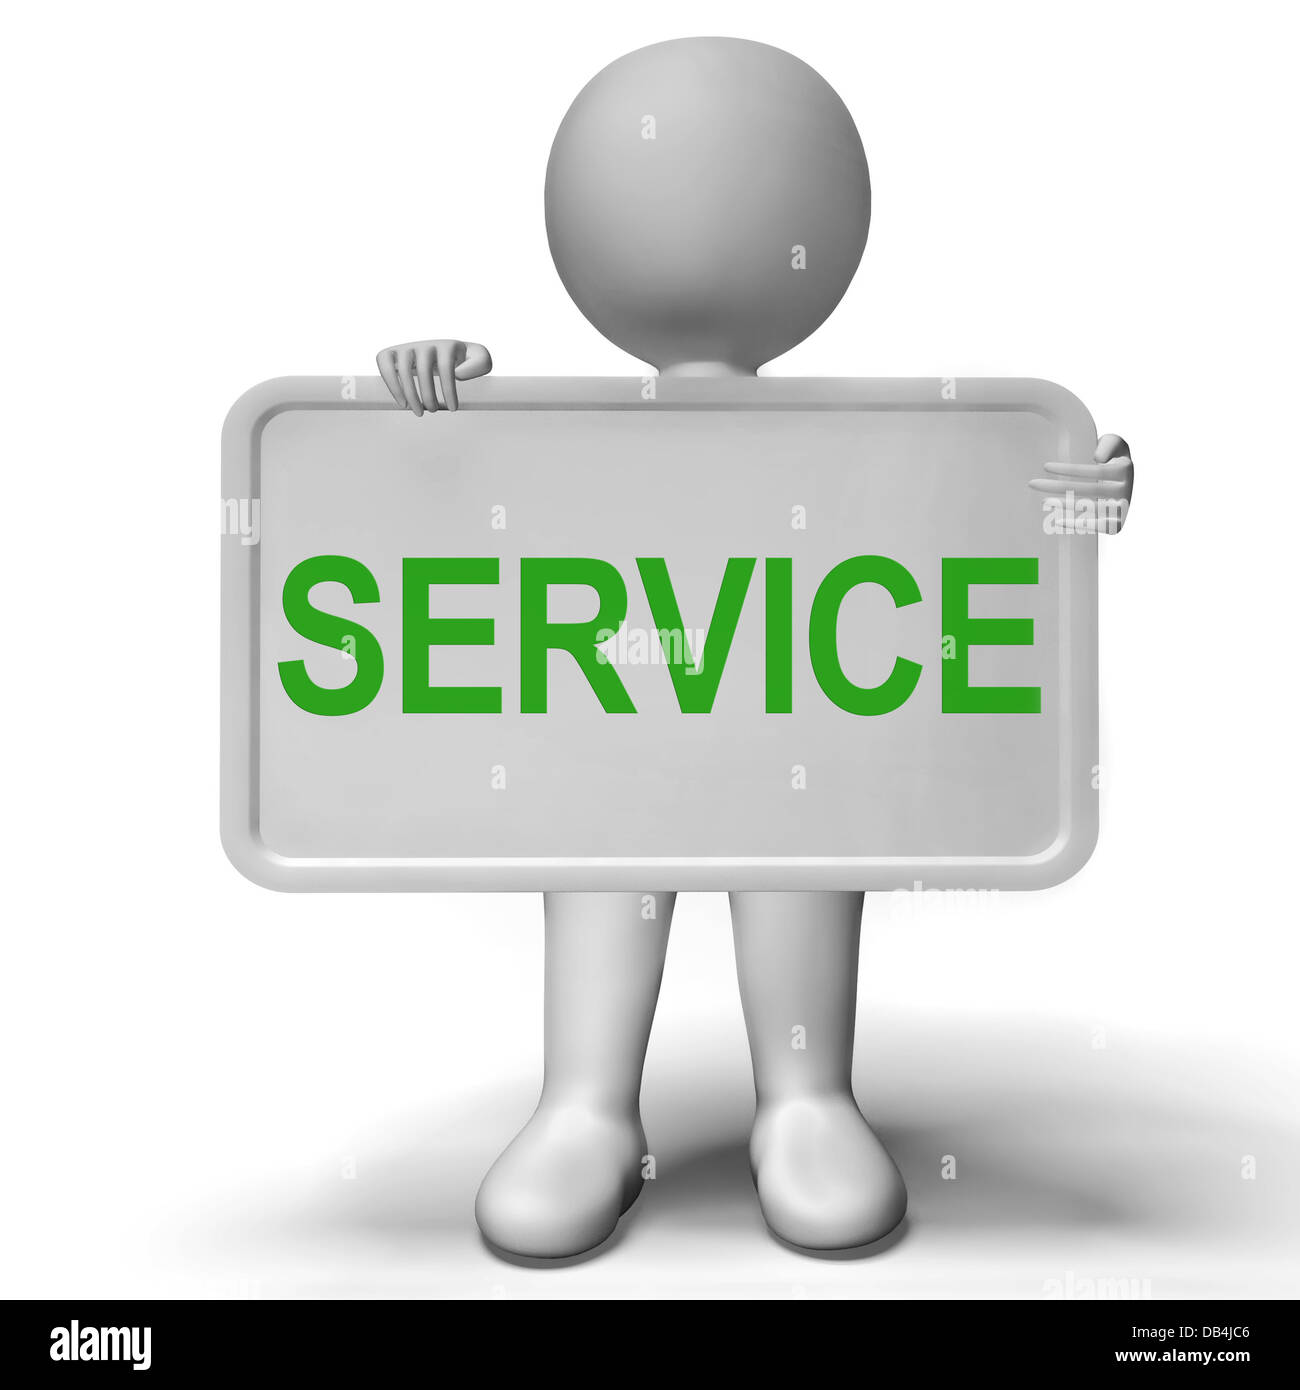 Service Button Means Help Support And Assistance Stock Photo